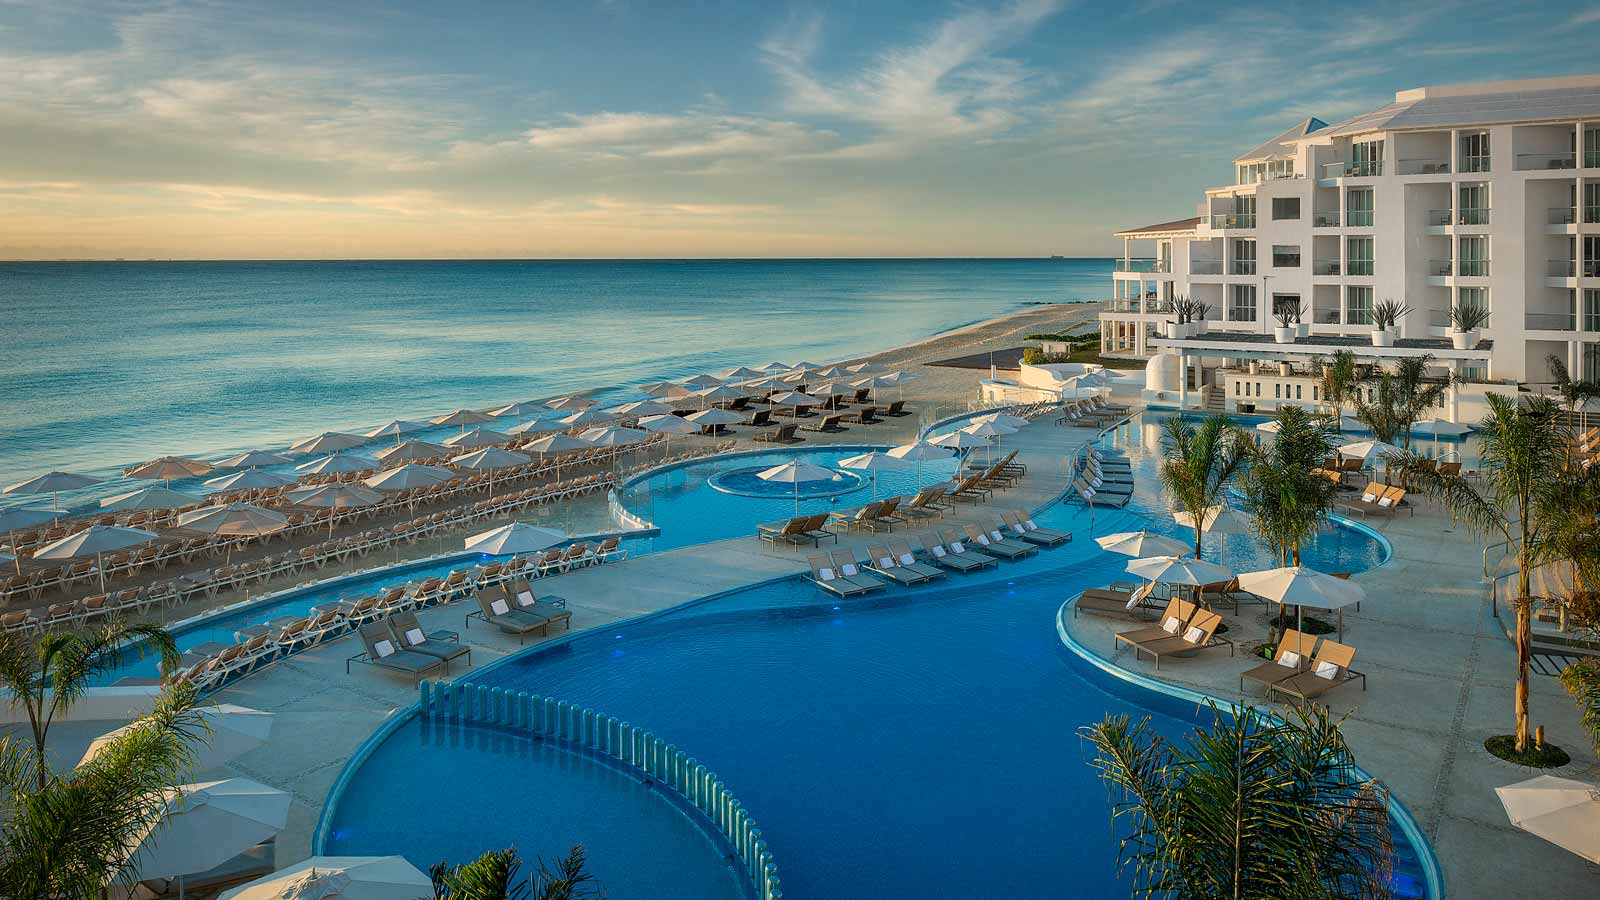 <p><strong>Address:</strong> Bahía del Espíritu Santo s/n, Centro, 77710 Playa del Carmen, Q.R., Mexico</p><p>A crowd favorite, Playacar Palace is a smaller resort that serves high-quality drinks, food, and overall service. The resort is close to the ferry dock where you can visit Cozumel, Fifth Avenue for the shops, and Playa del Carmen’s exciting nightlife.</p>